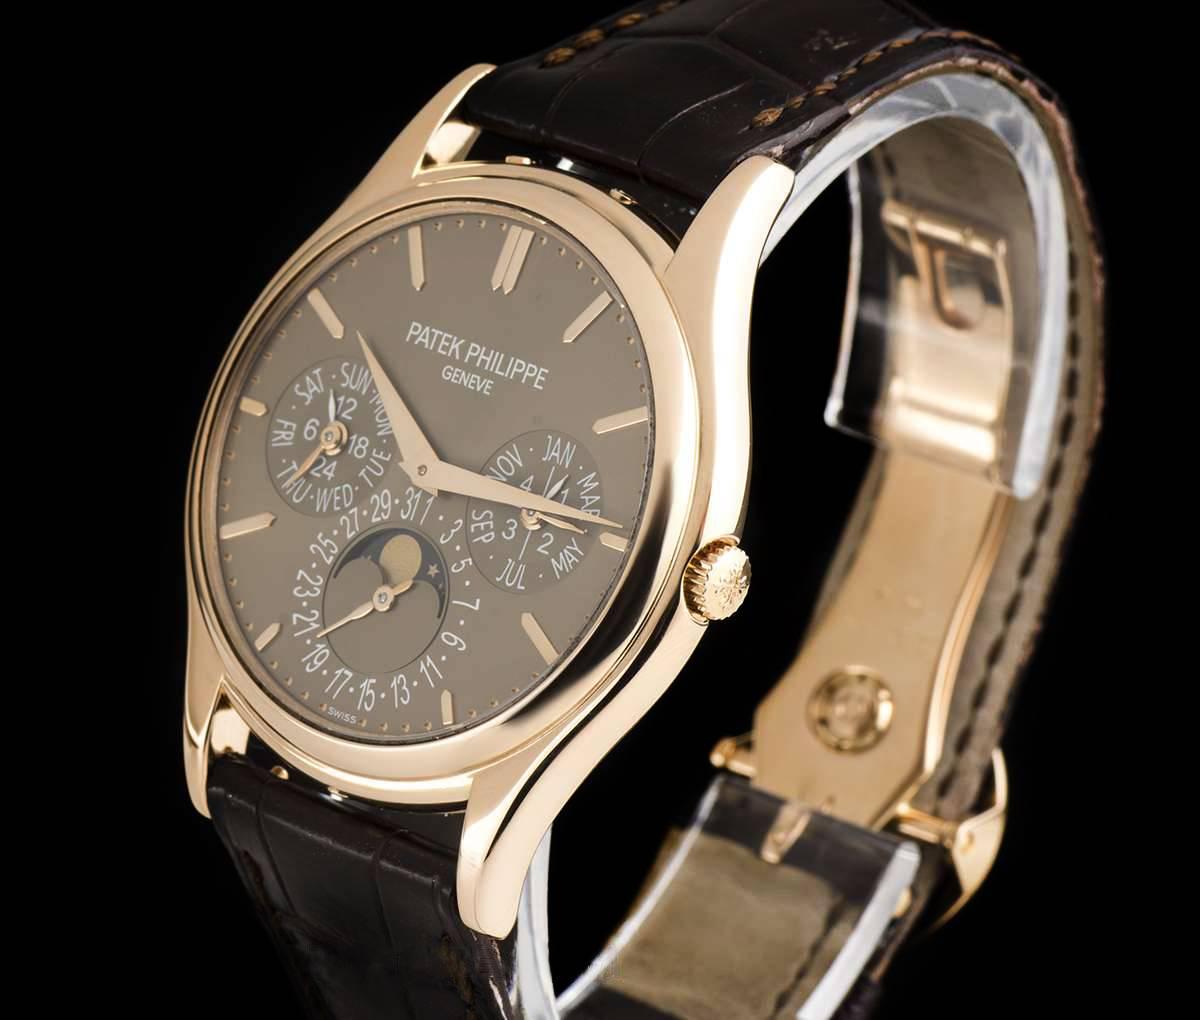 An 18k Rose Gold Perpetual Calendar Ultra Thin Gents Wristwatch, brown dial with applied hour markers, minute markers on outer edge of the dial, month and leap year sub-dial at 3 0'clock, moonphase and date sub-dial at 6 0'clock, weekday and 24 hour